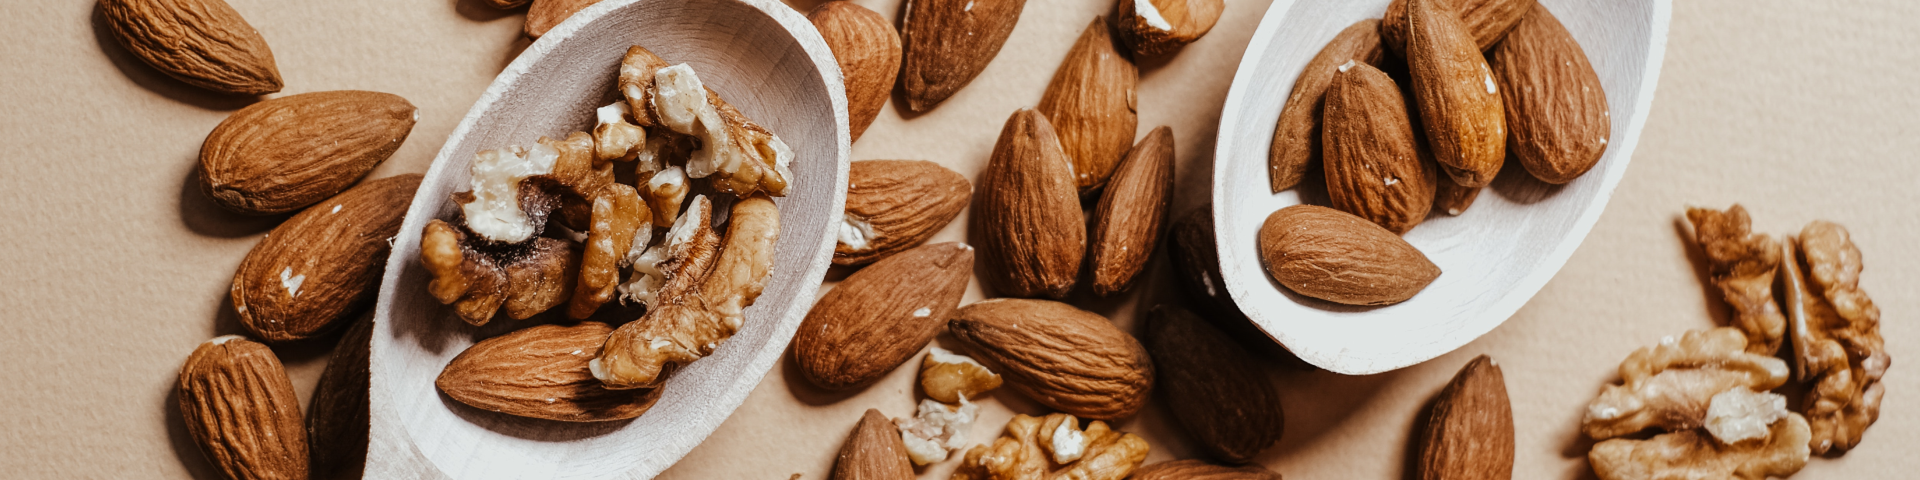 Spoonfuls of walnuts and almonds which are foods high in omega-3 dha.